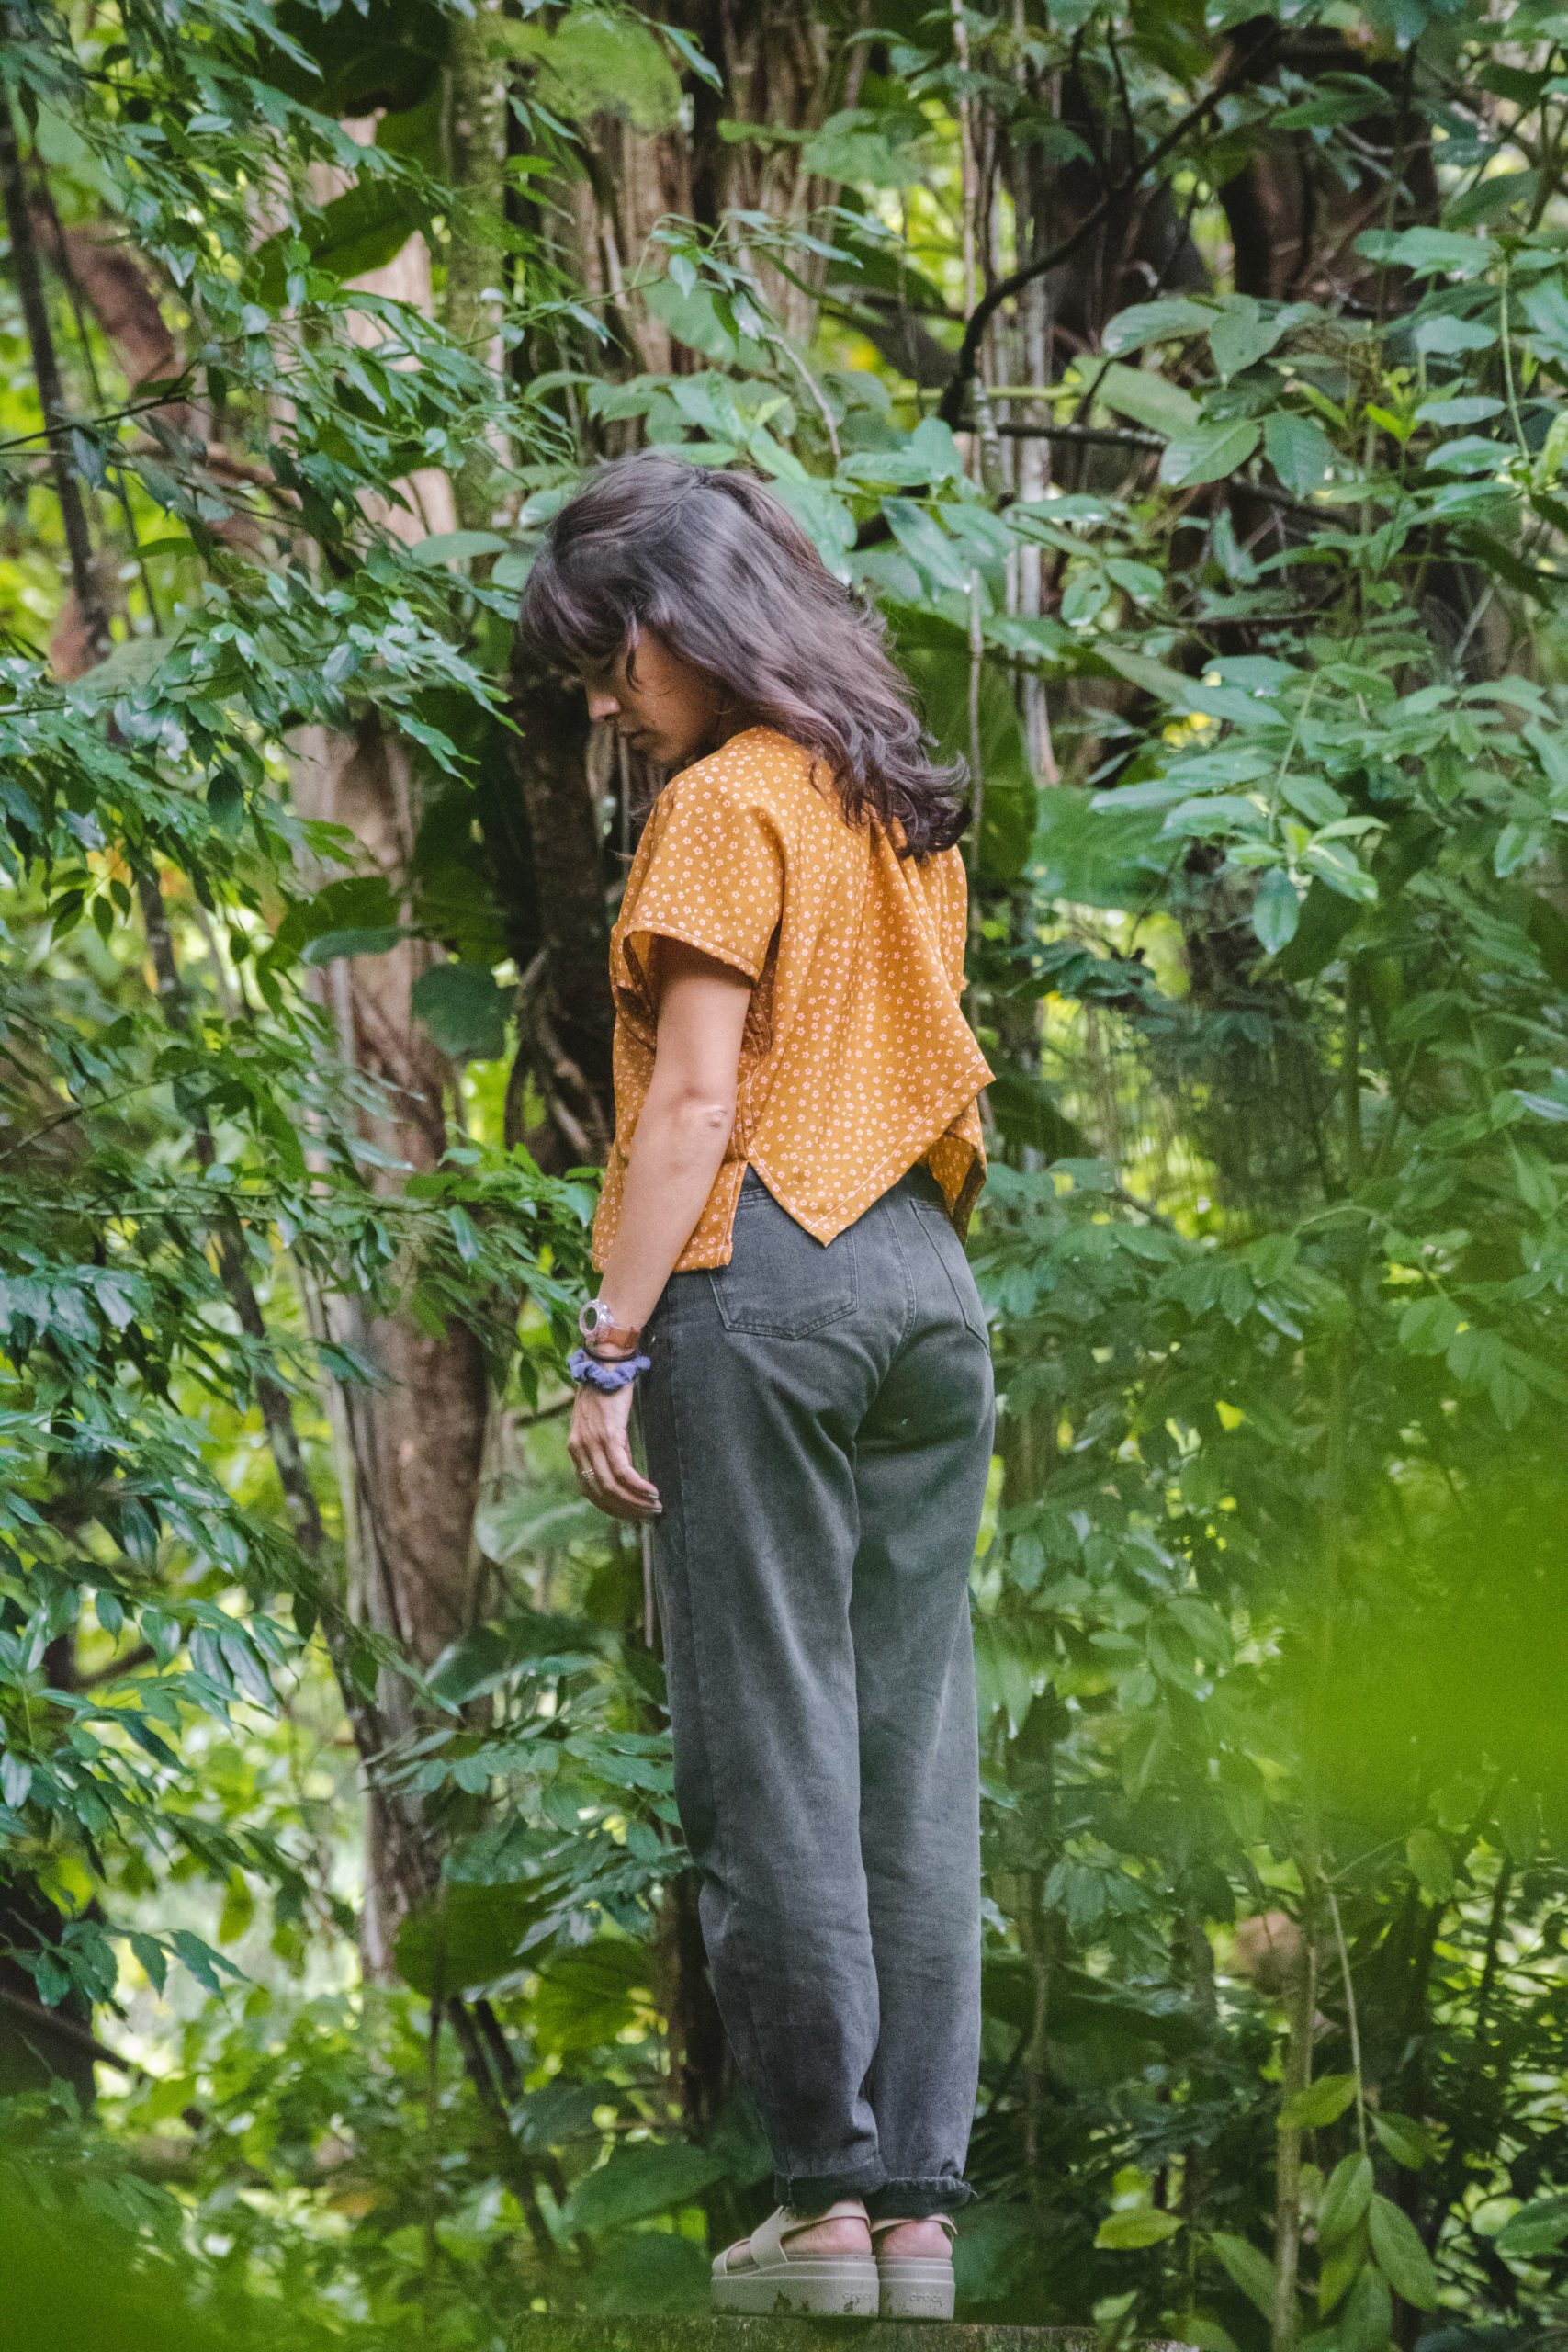 Woman in an orange top and black jeans looks down with a forested background